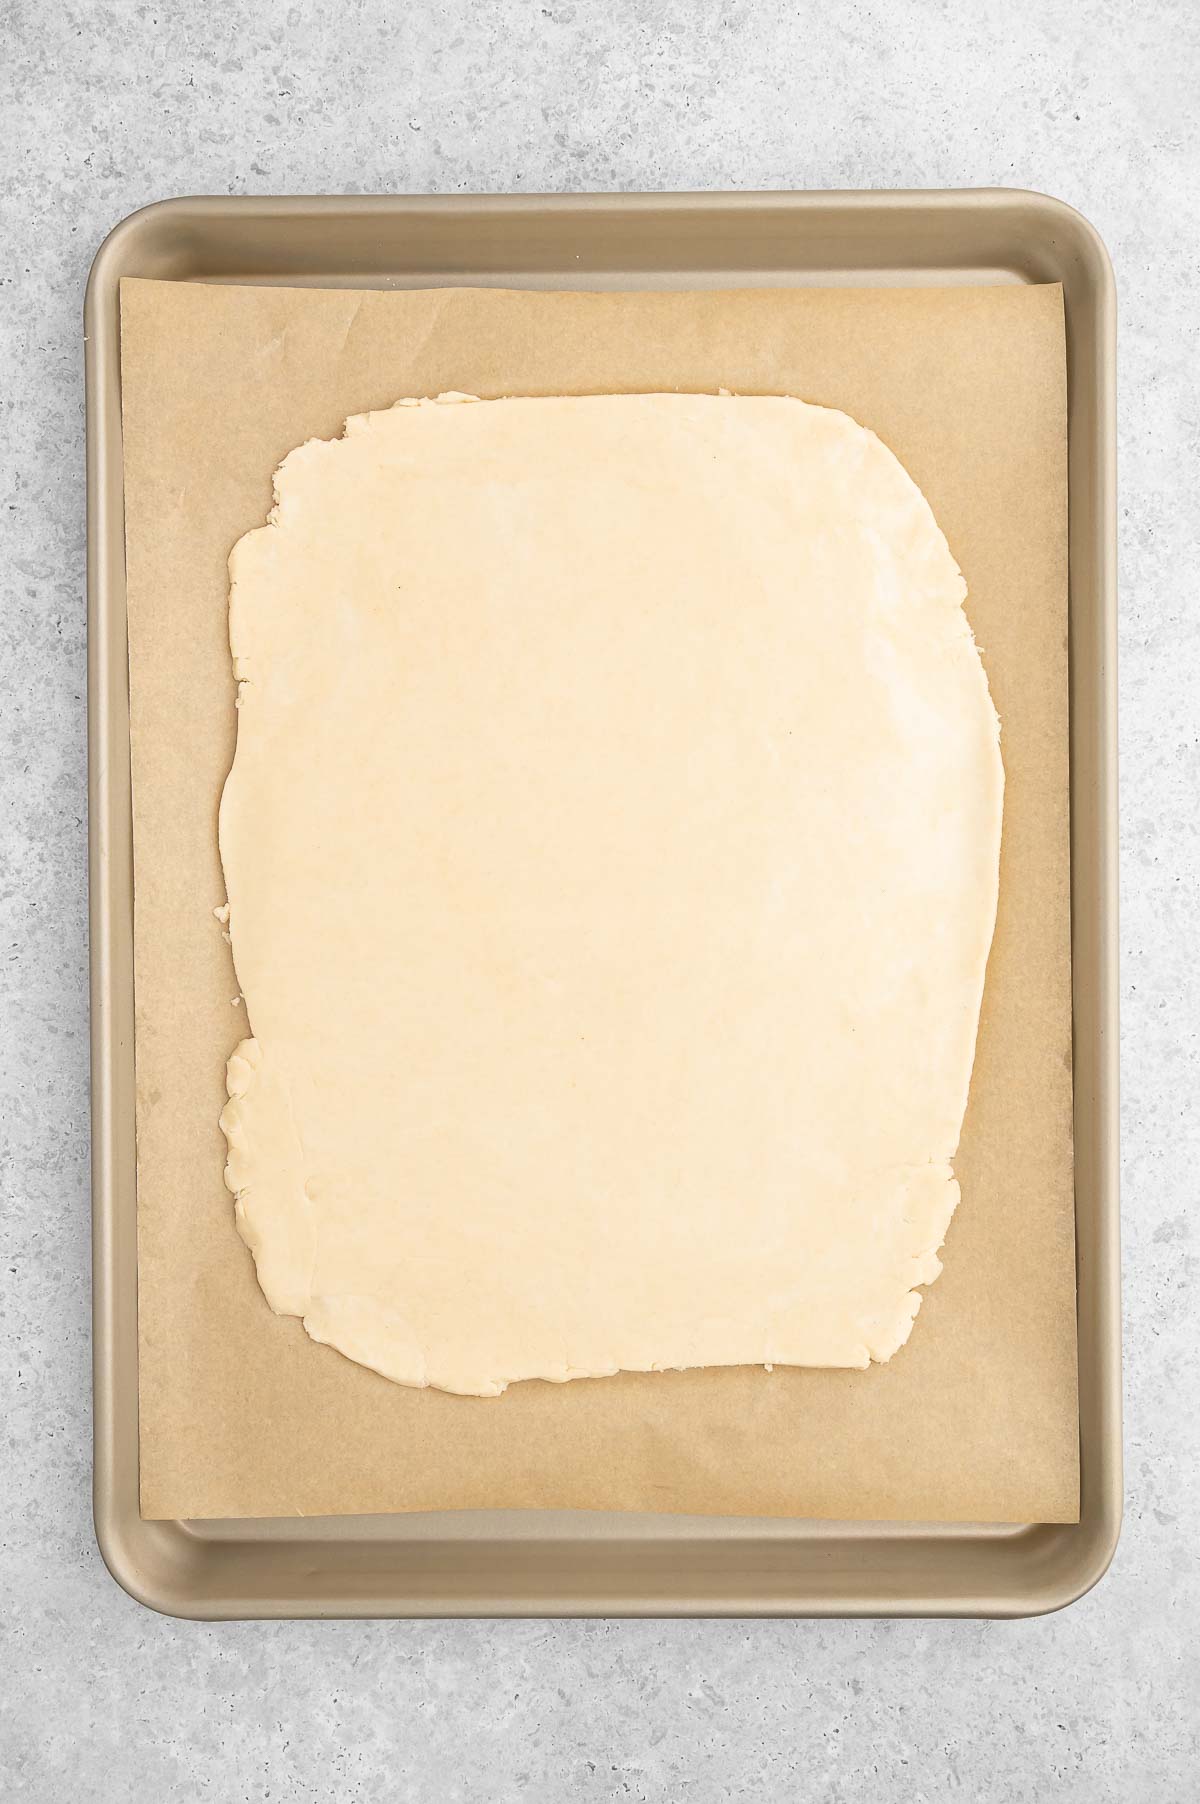 The rolled out pot pie crust on a baking sheet lined with parchment paper.